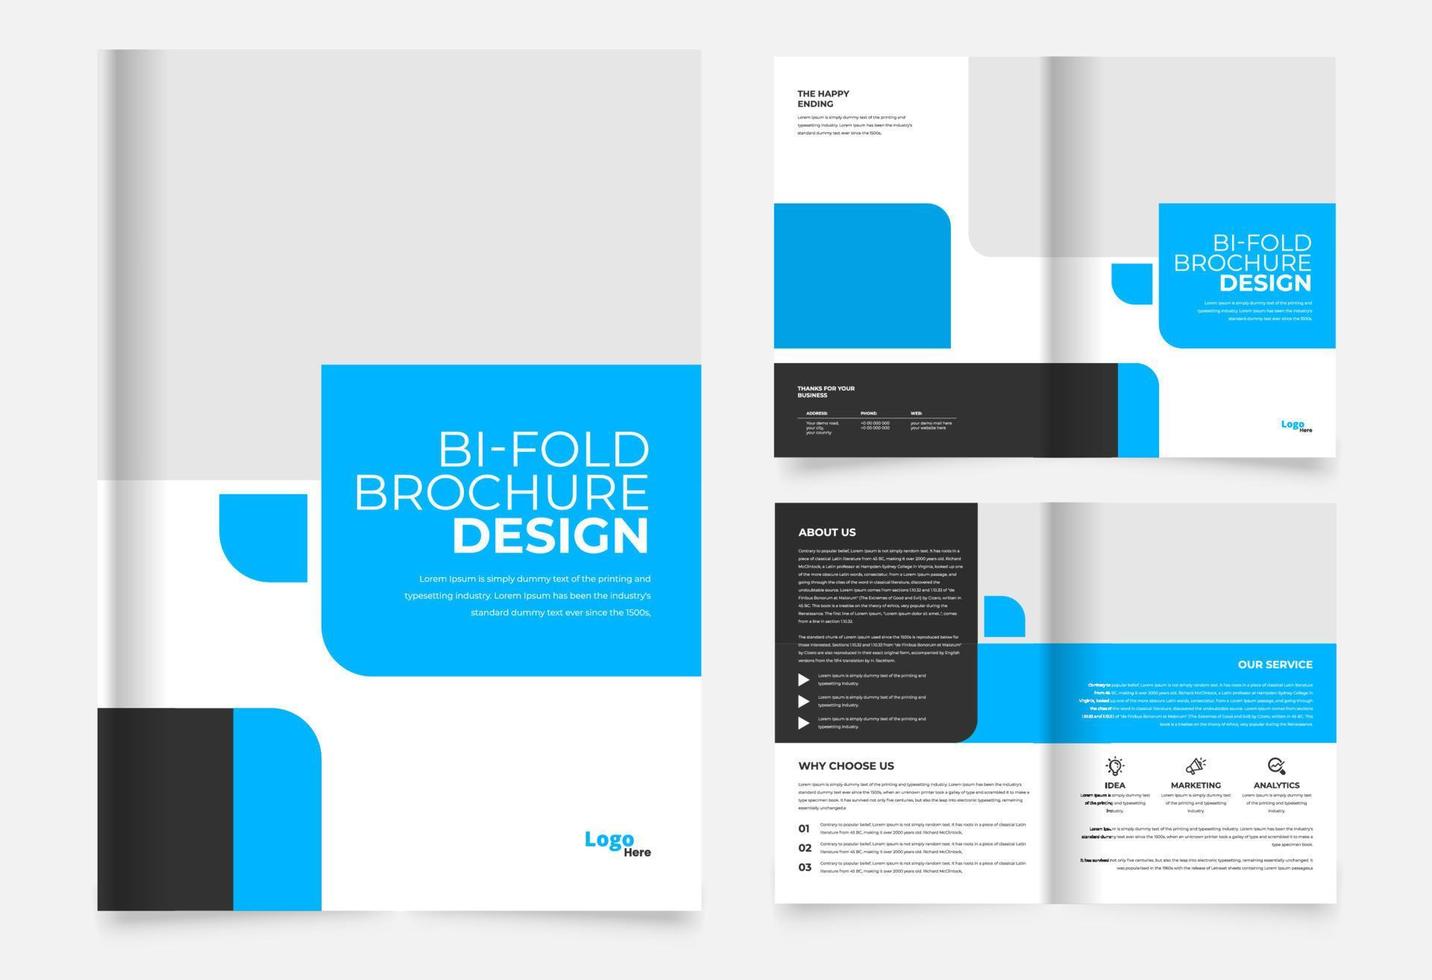 creative professional abstract business brochure design template vector